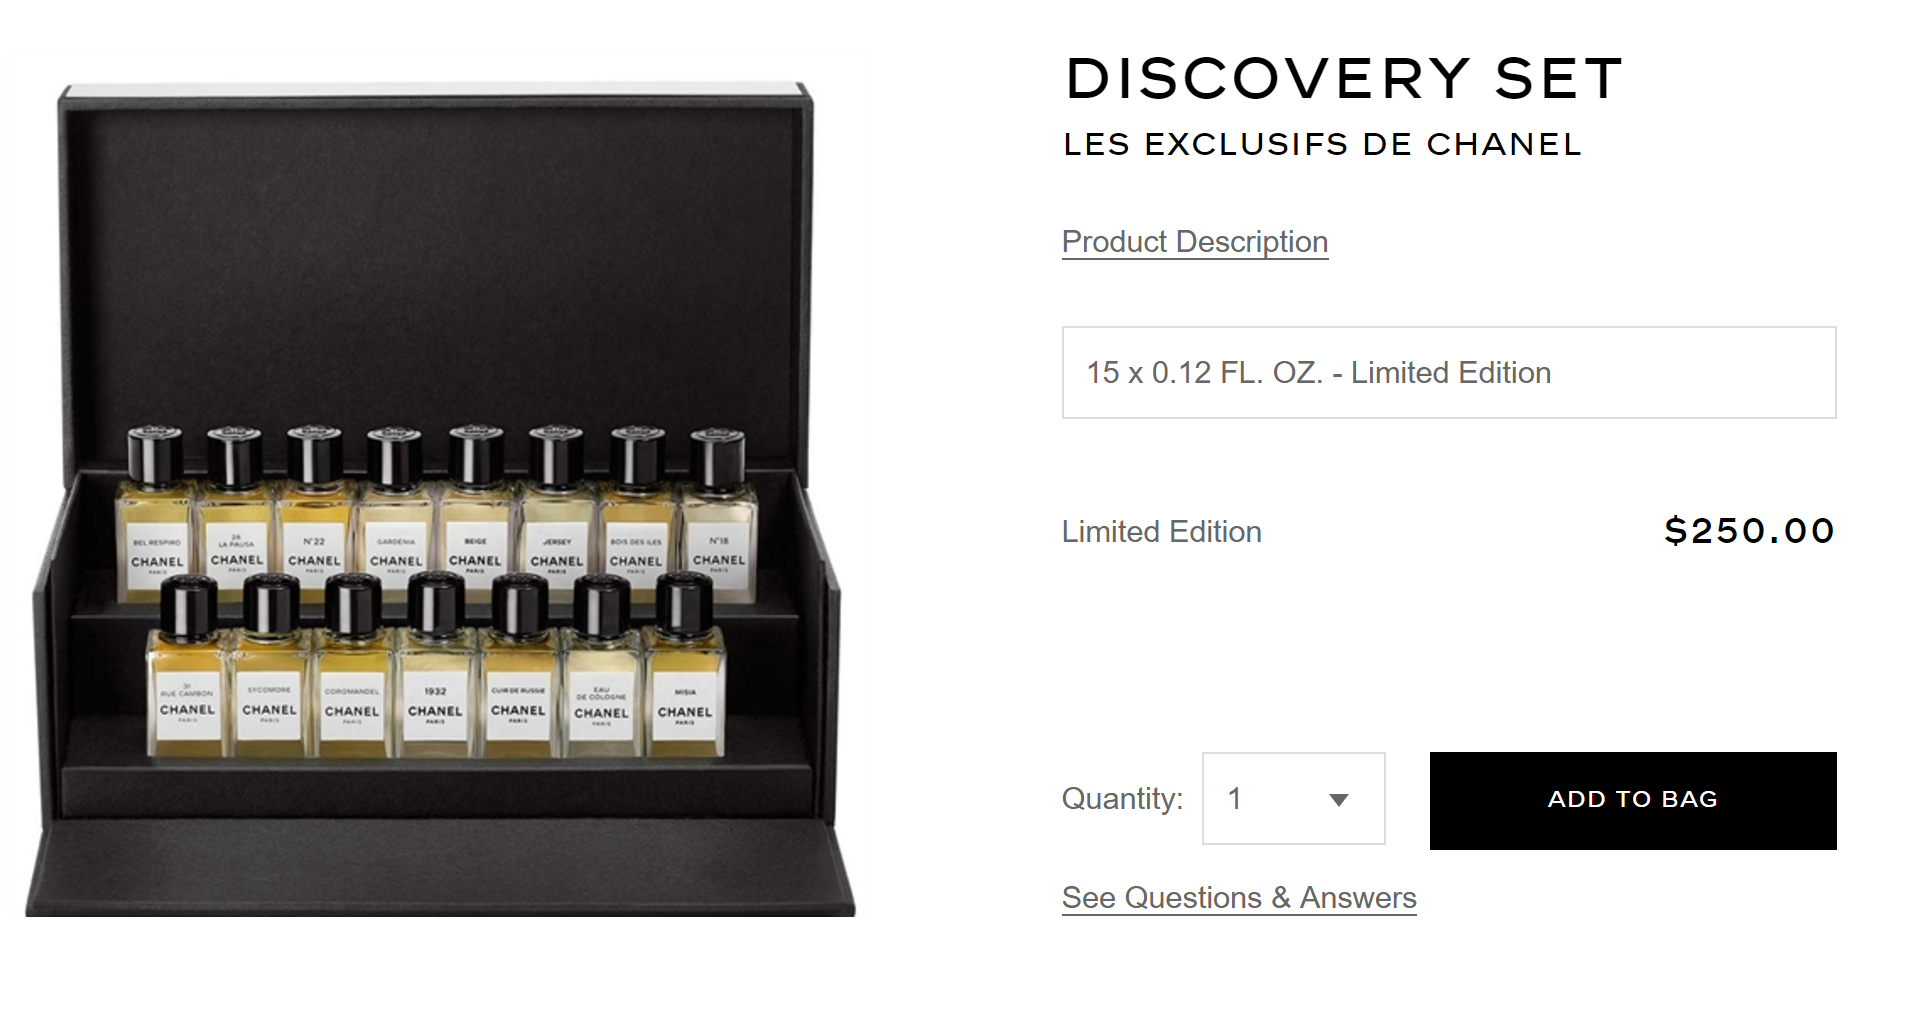 Two limited edition Chanel Sycomore and Maisons d'art coffrets